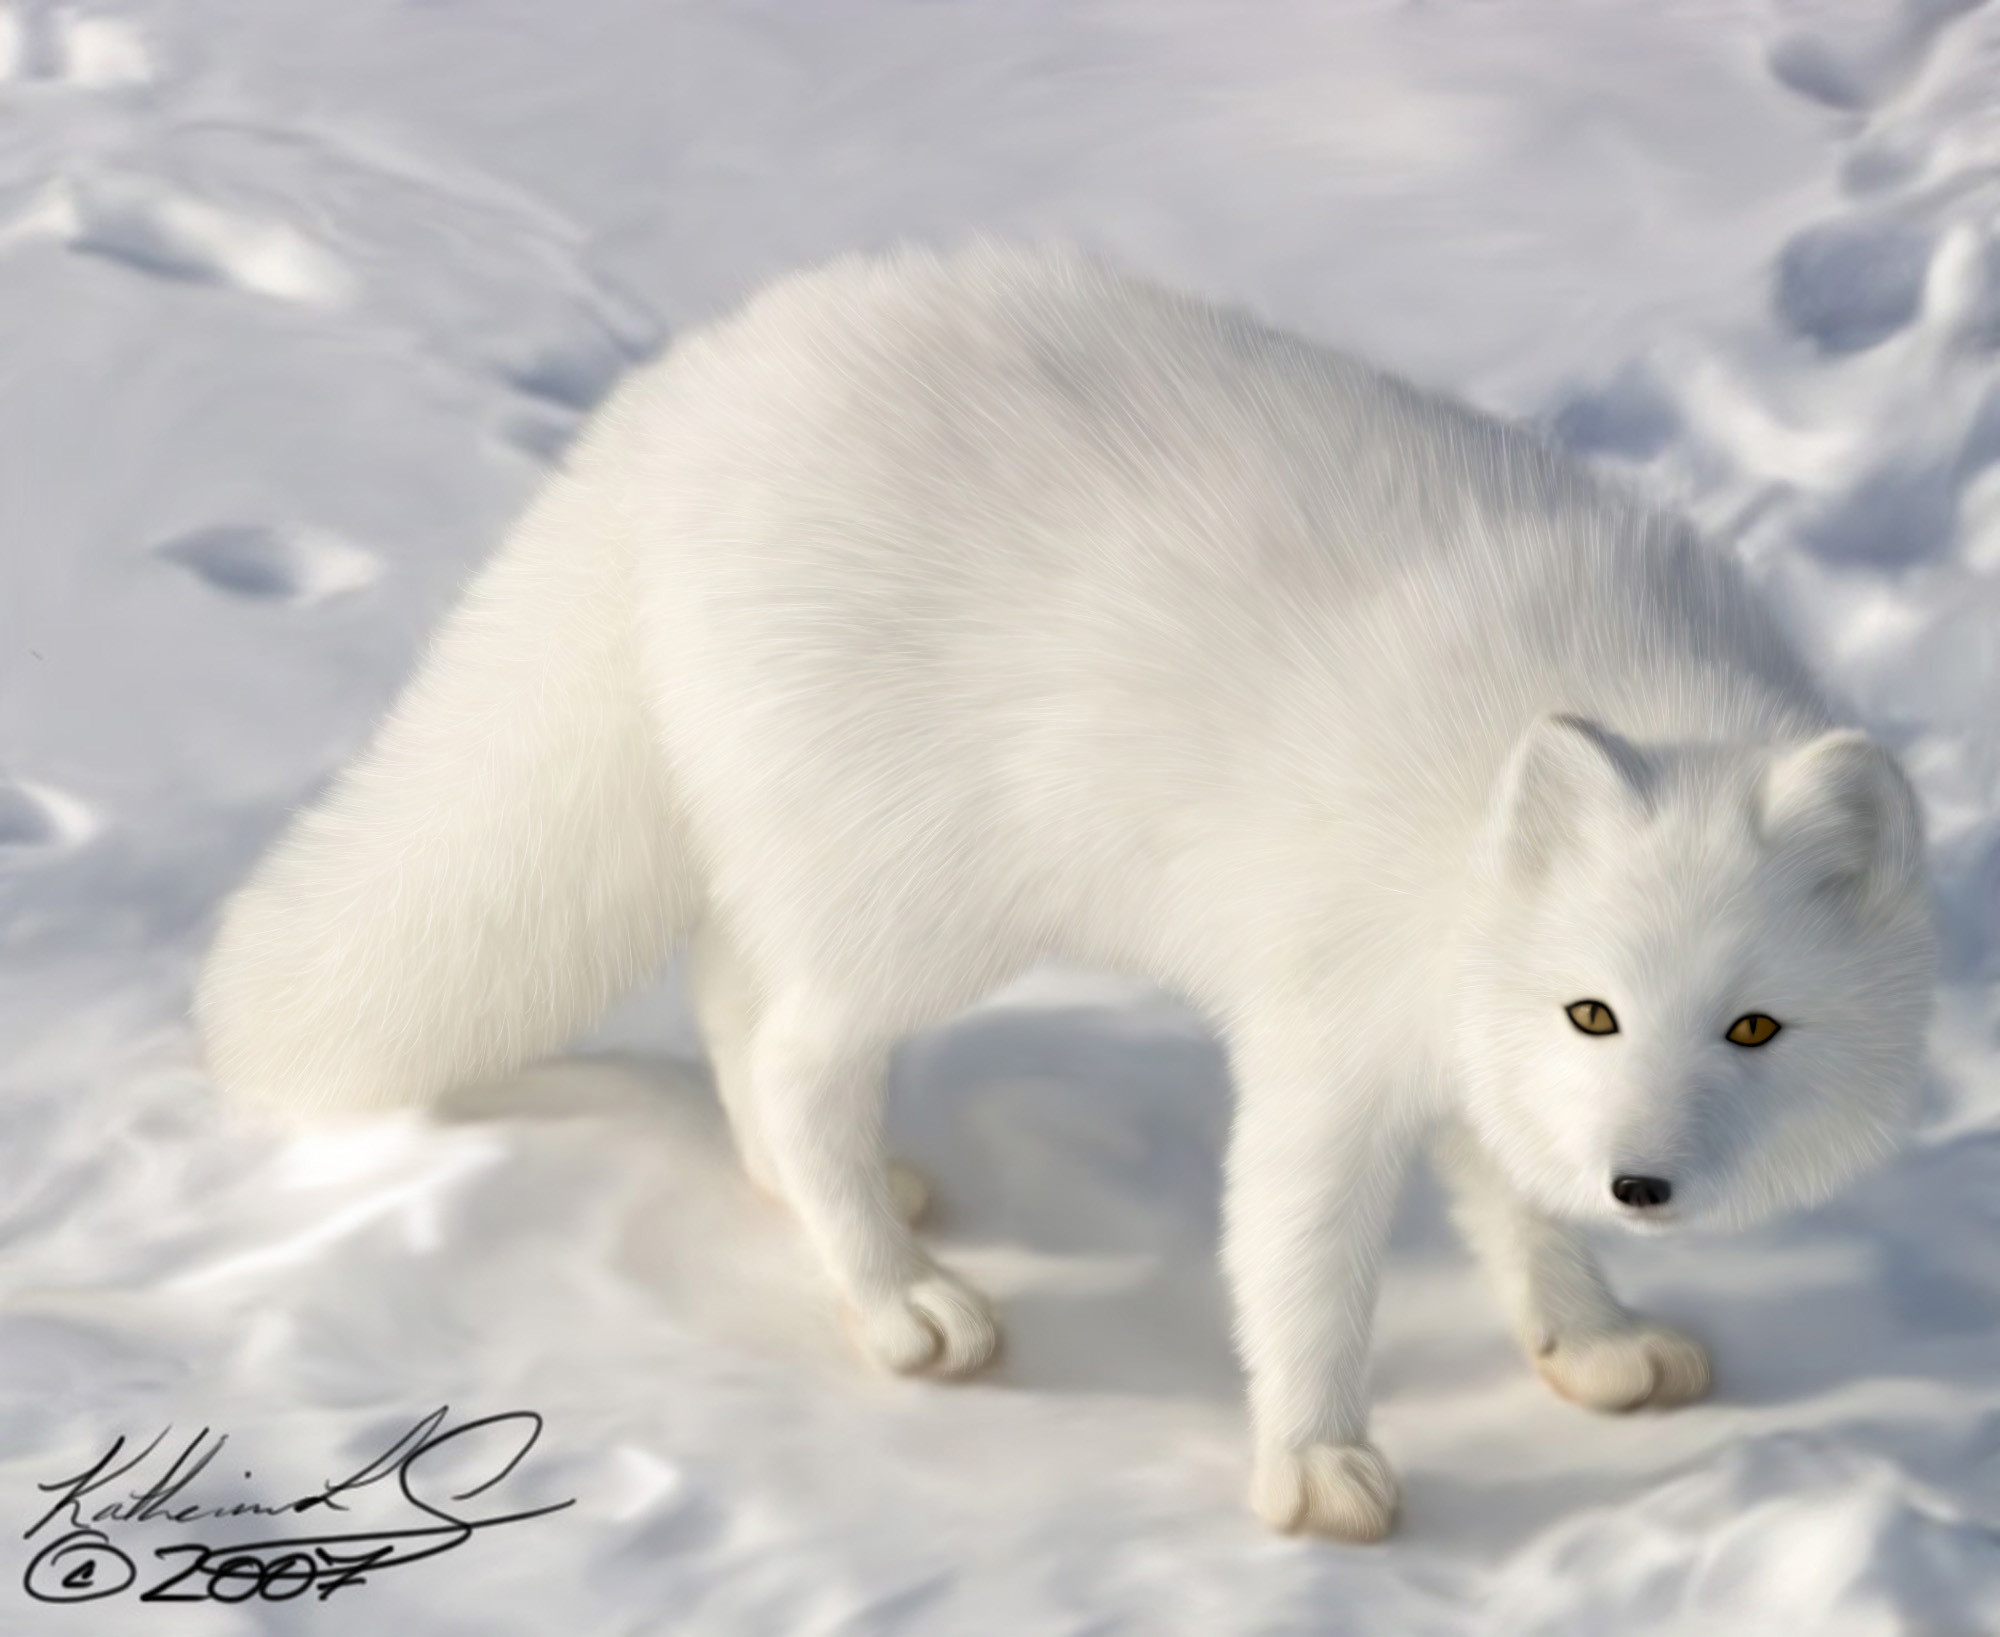 2000x1637 The arctic fox also called as white fox, snow fox or polar fox is small in  stature with a species name Vulpes Lagopus. It is seen in the Northern  Hemisphere